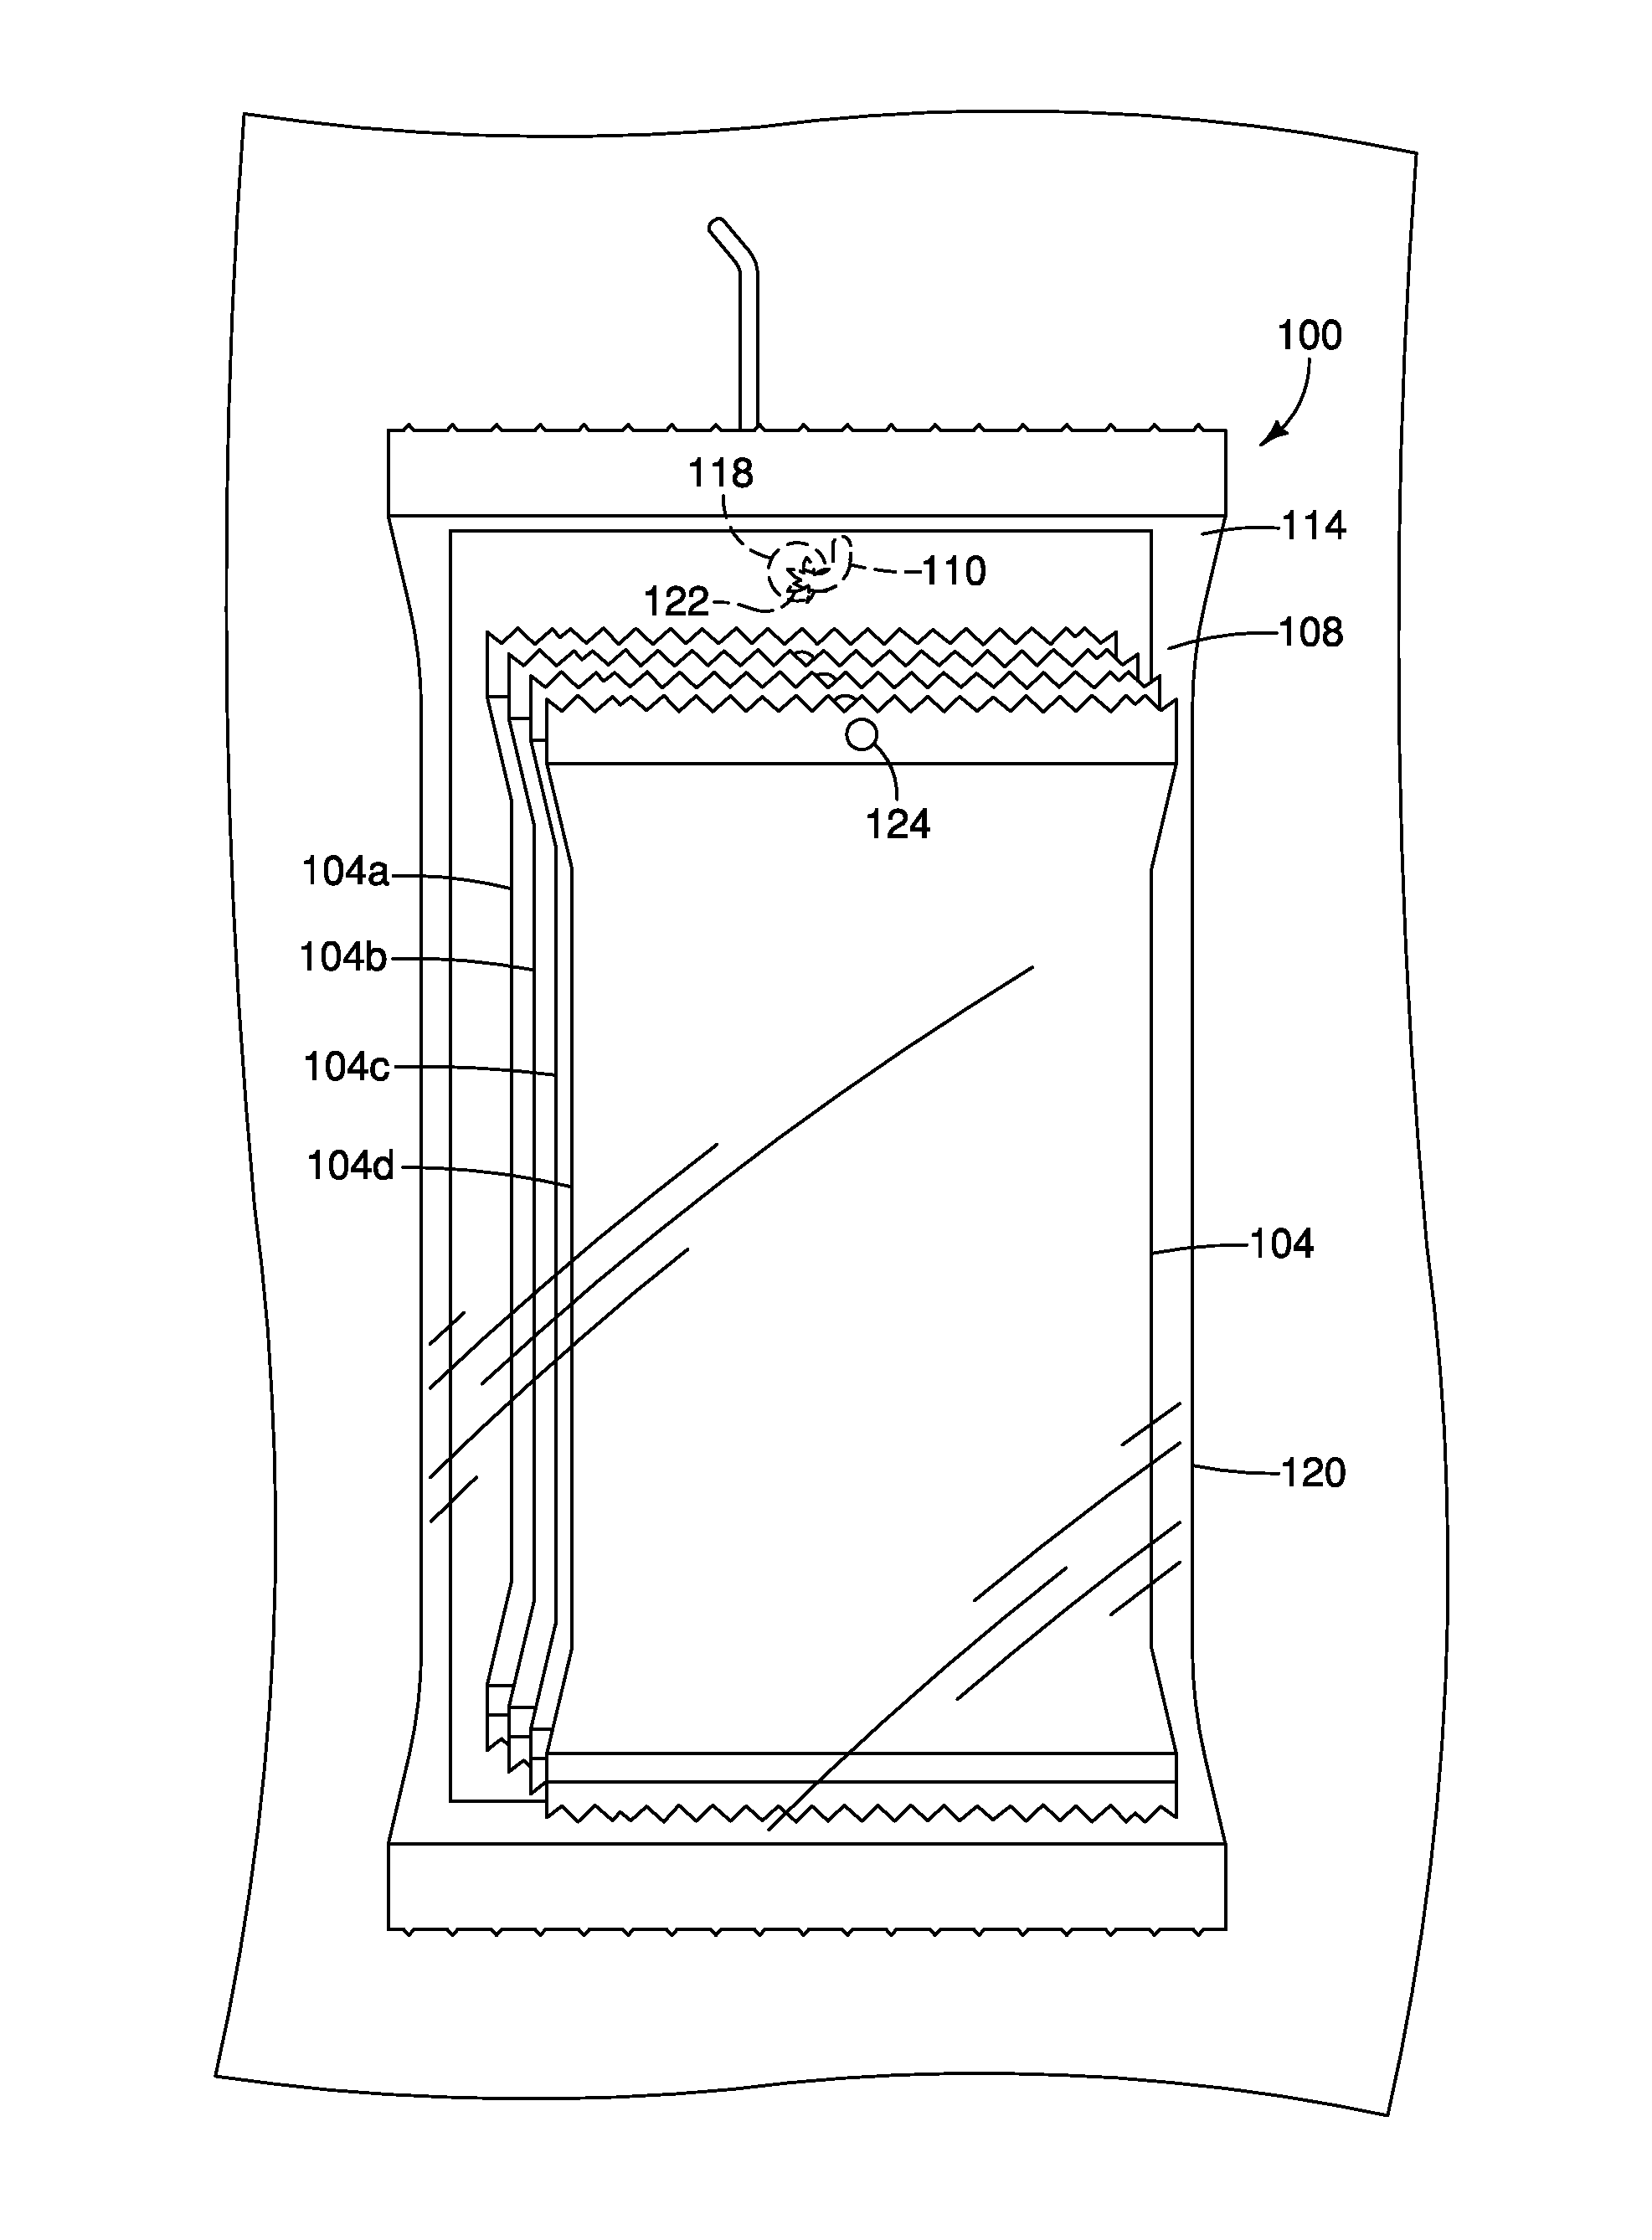 Washcloth for meatal area cleaning of an indwelling urinary catheterized patient